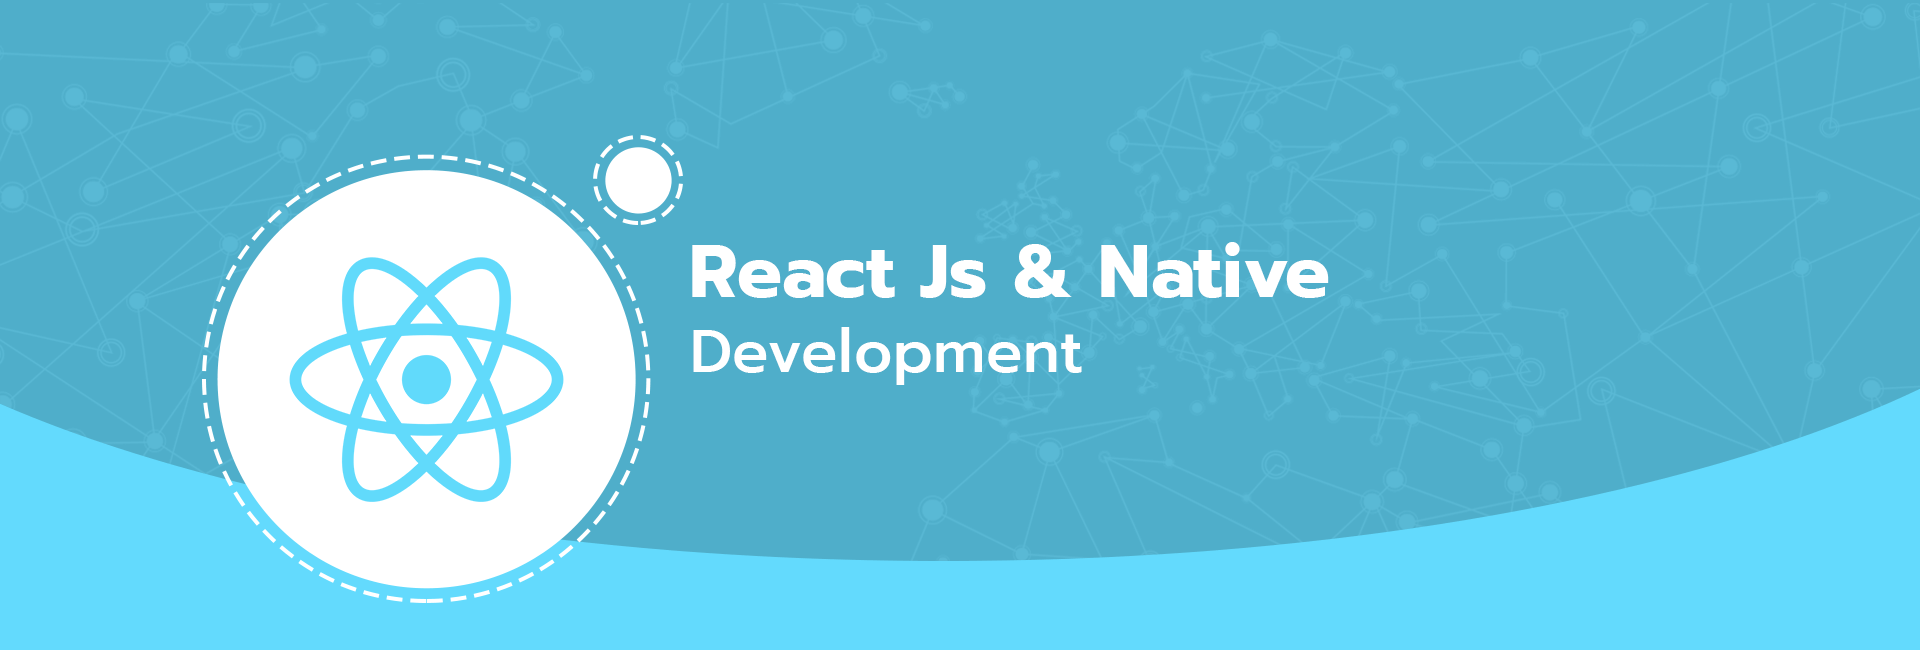 Why outsource React js developers?